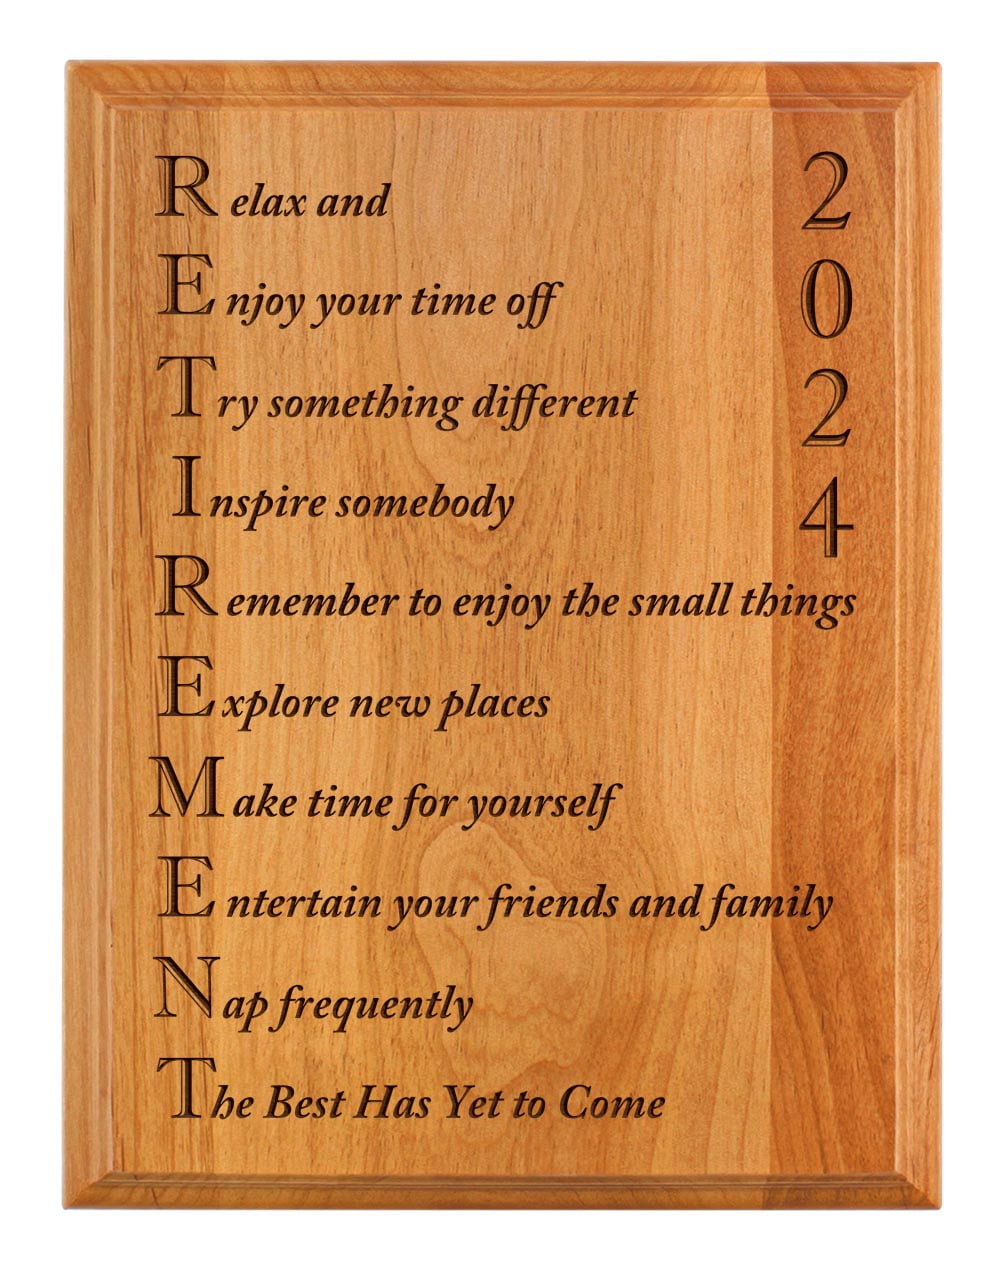 Retirement Gifts Retirement Sign, Retirement Party Ideas, Retirement G –  Letter Art Gifts